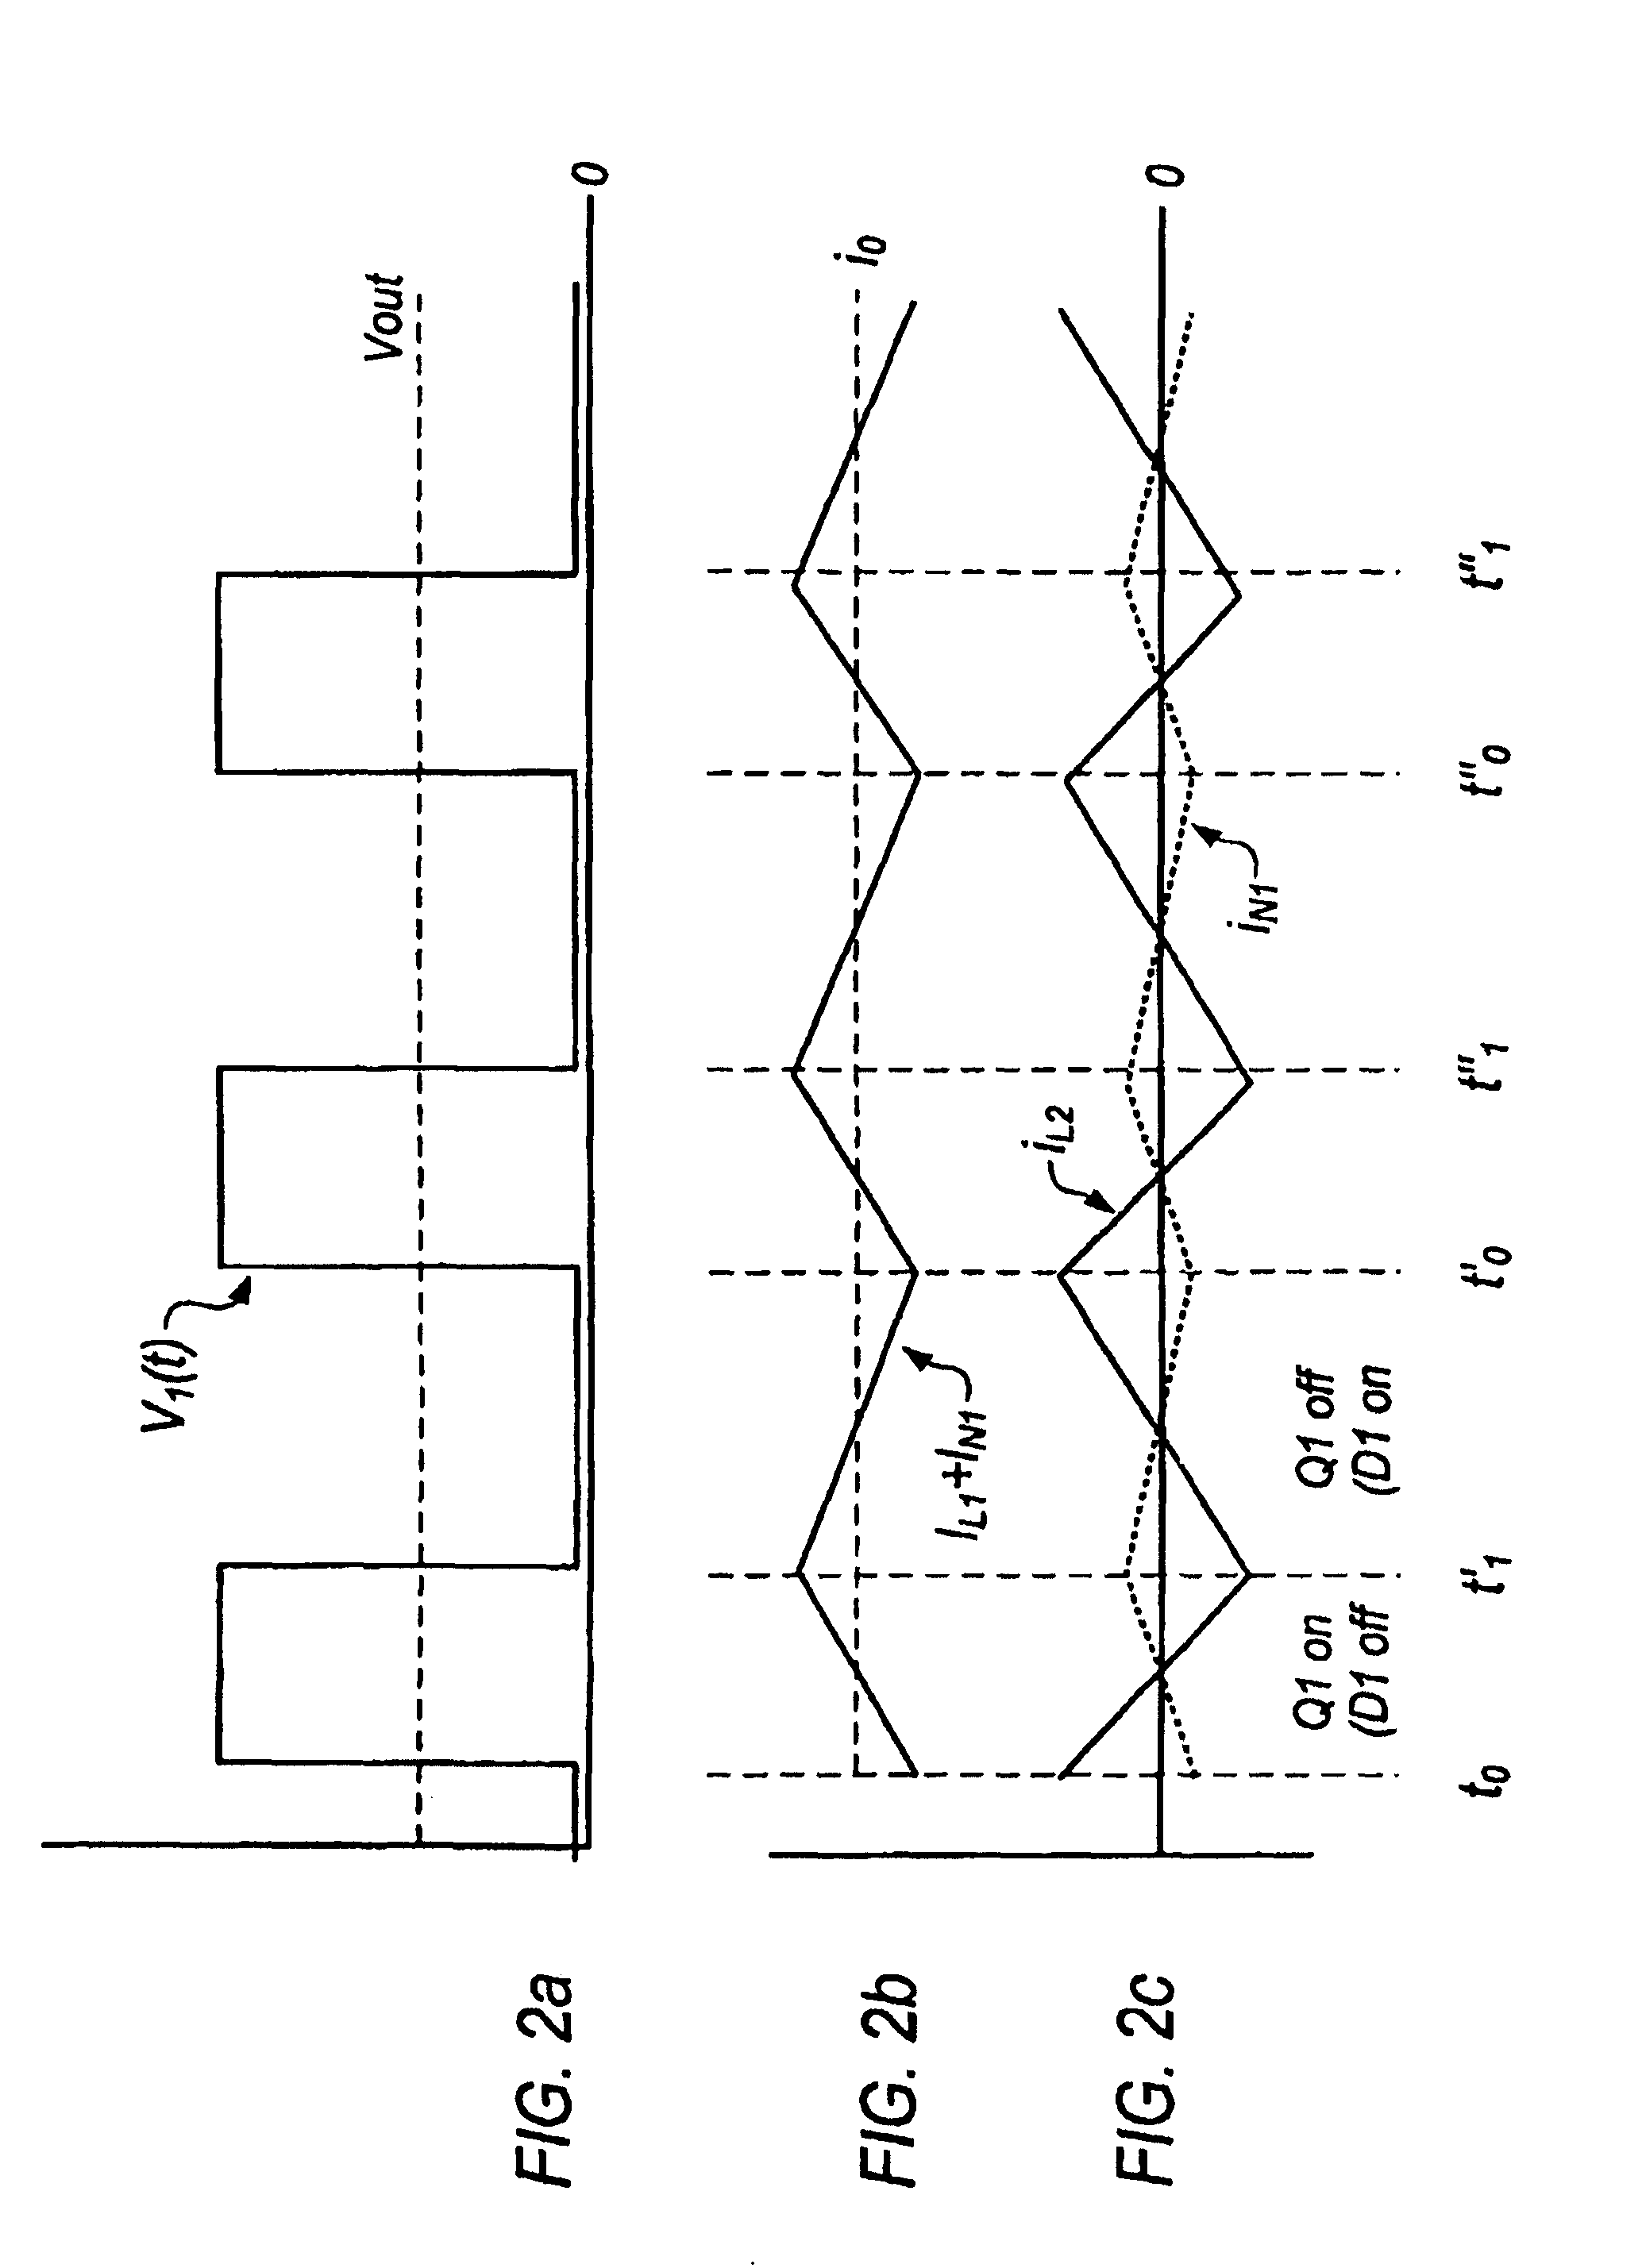 Ripple cancellation circuit for ultra-low-noise power supplies